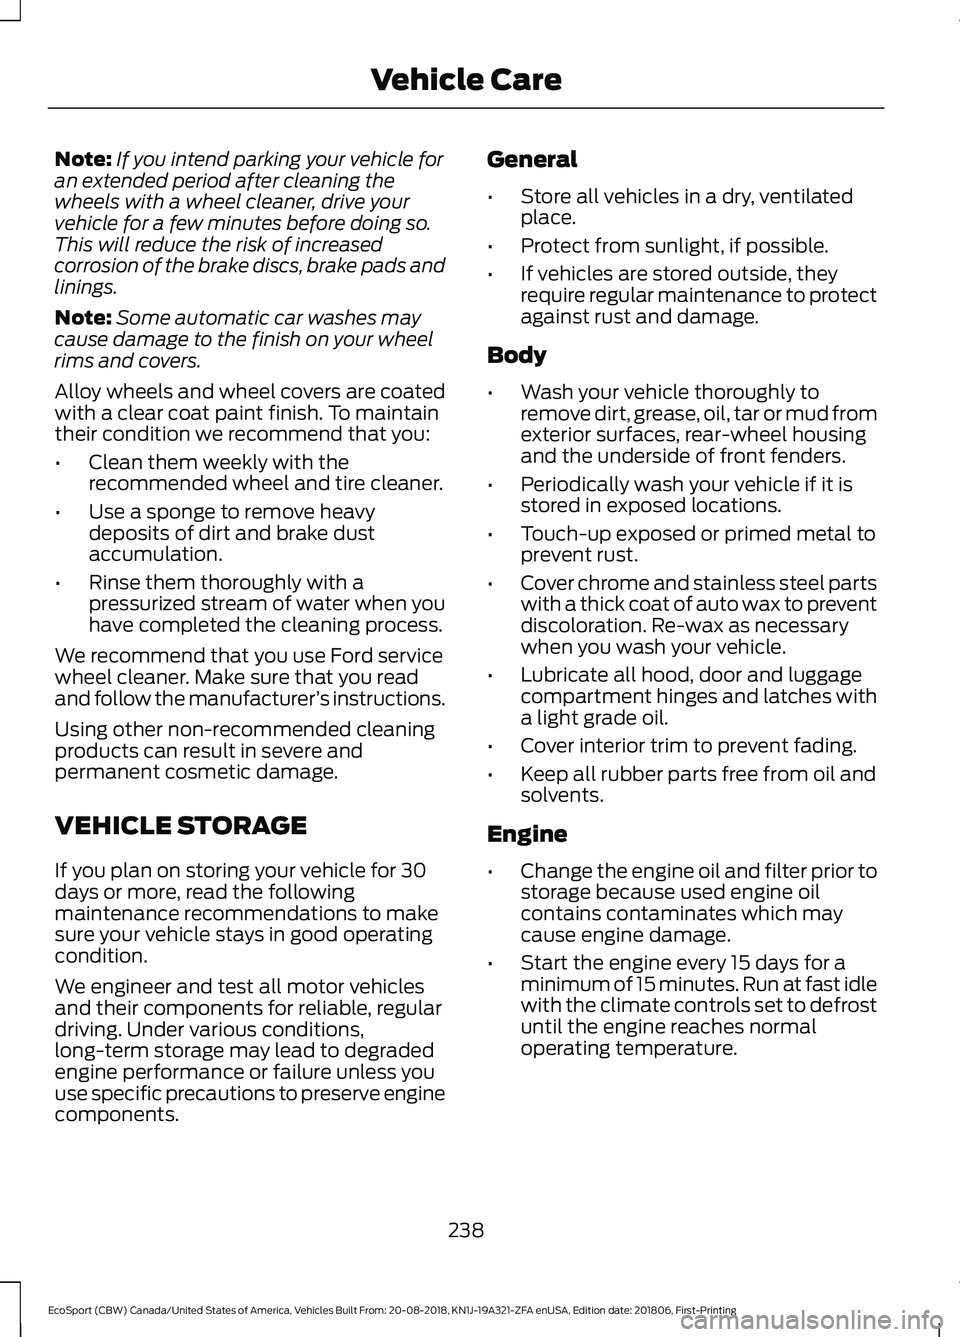 FORD ECOSPORT 2019  Owners Manual Note:If you intend parking your vehicle foran extended period after cleaning thewheels with a wheel cleaner, drive yourvehicle for a few minutes before doing so.This will reduce the risk of increasedc